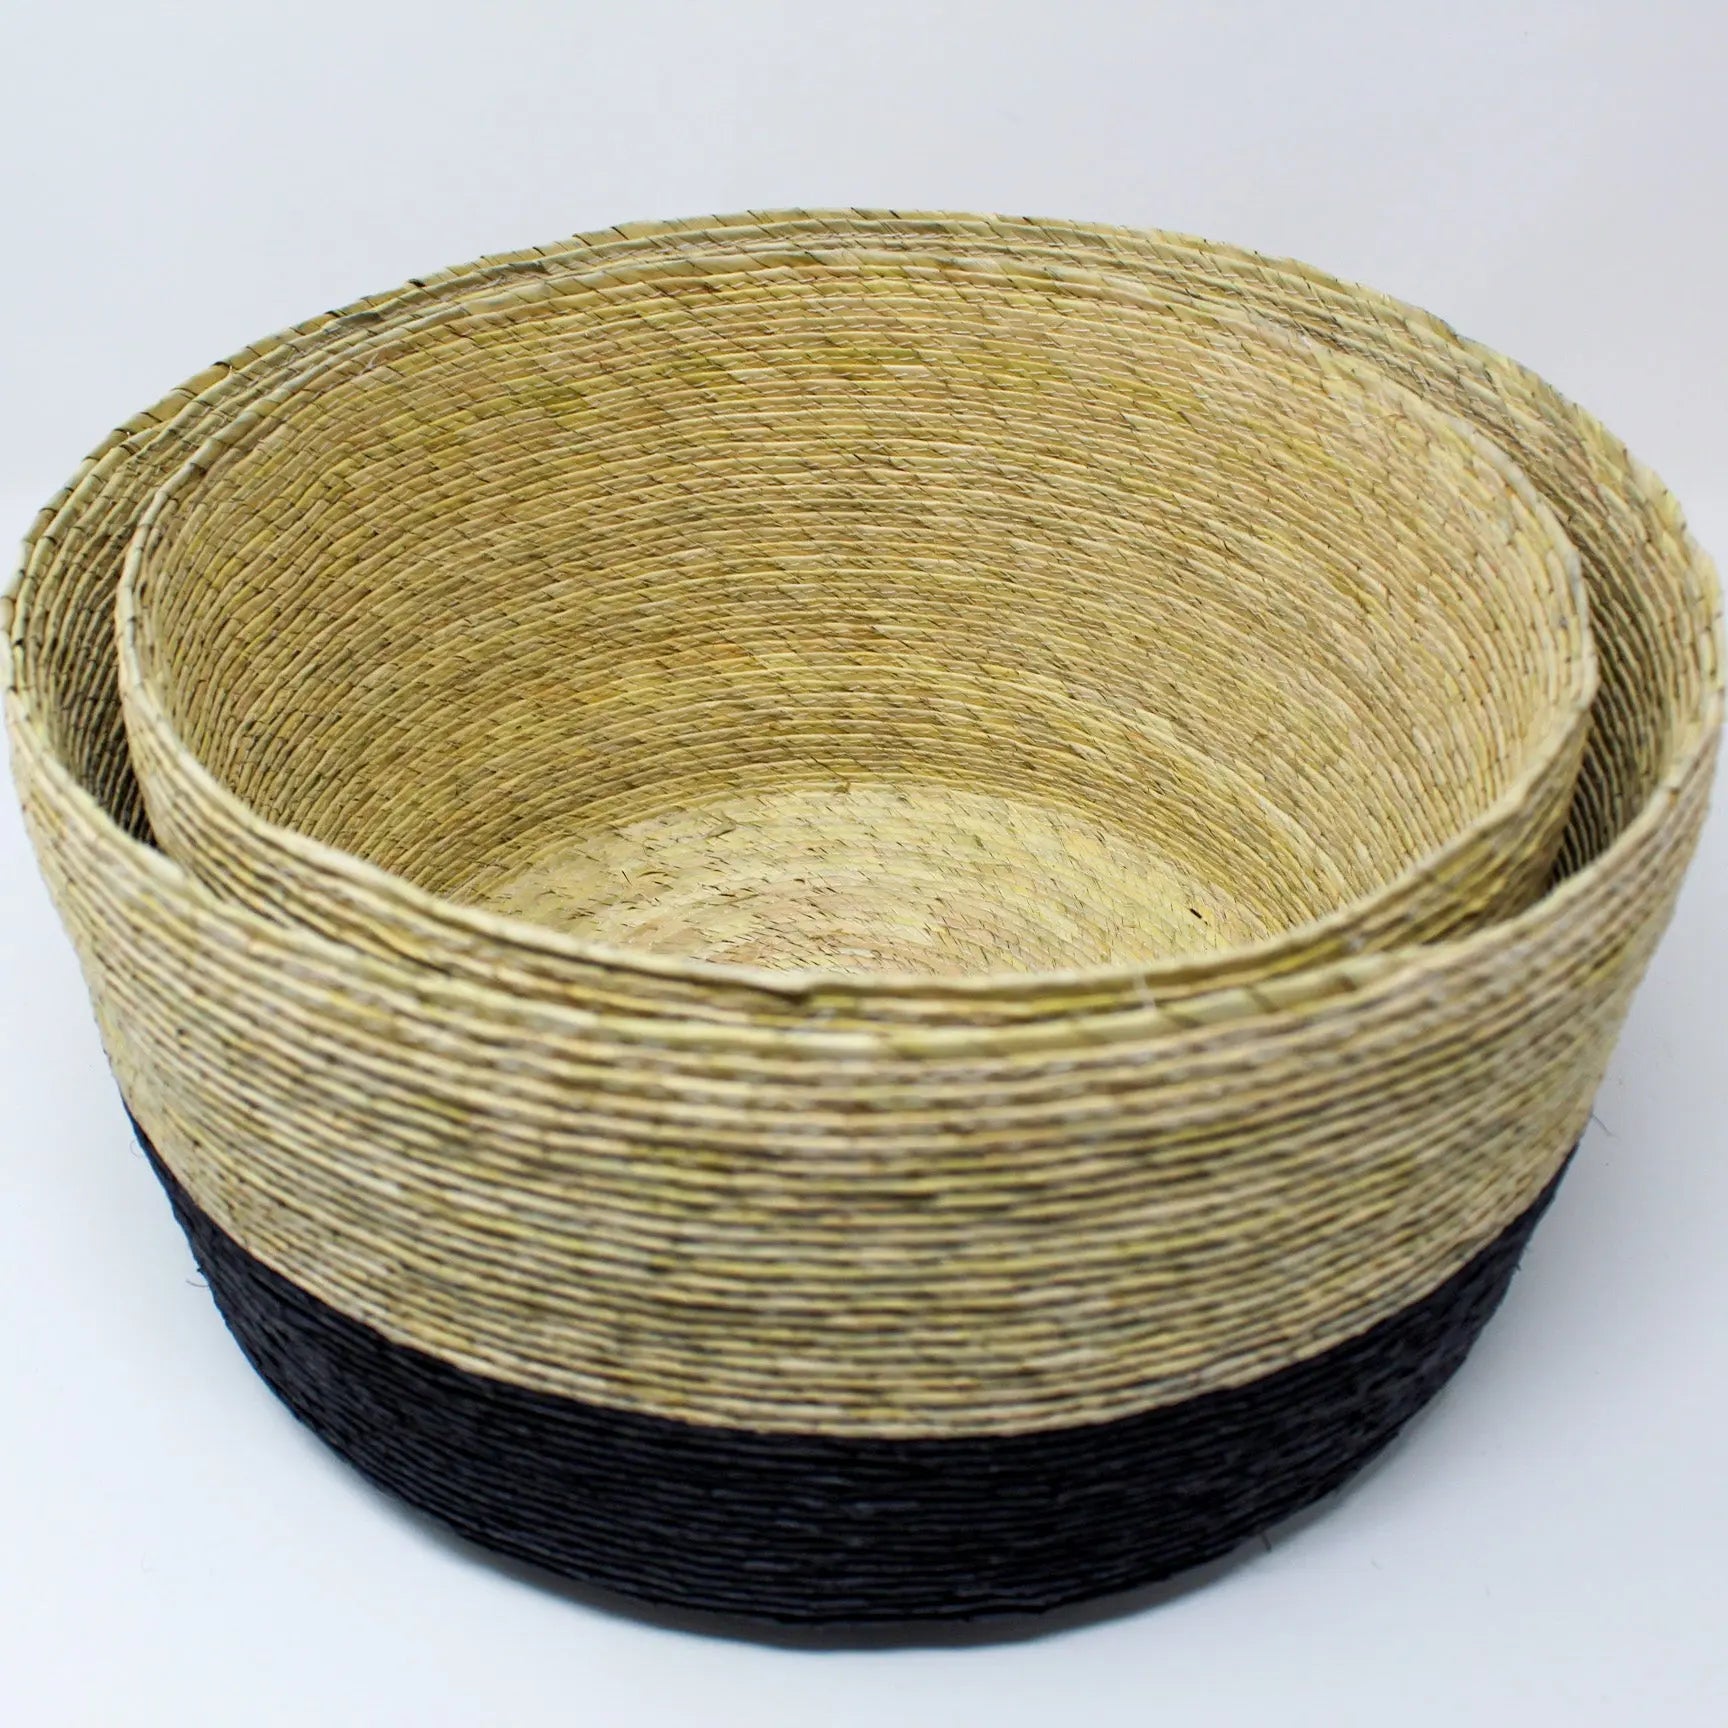 Lidded Storage Basket in Carbon - Home Smith